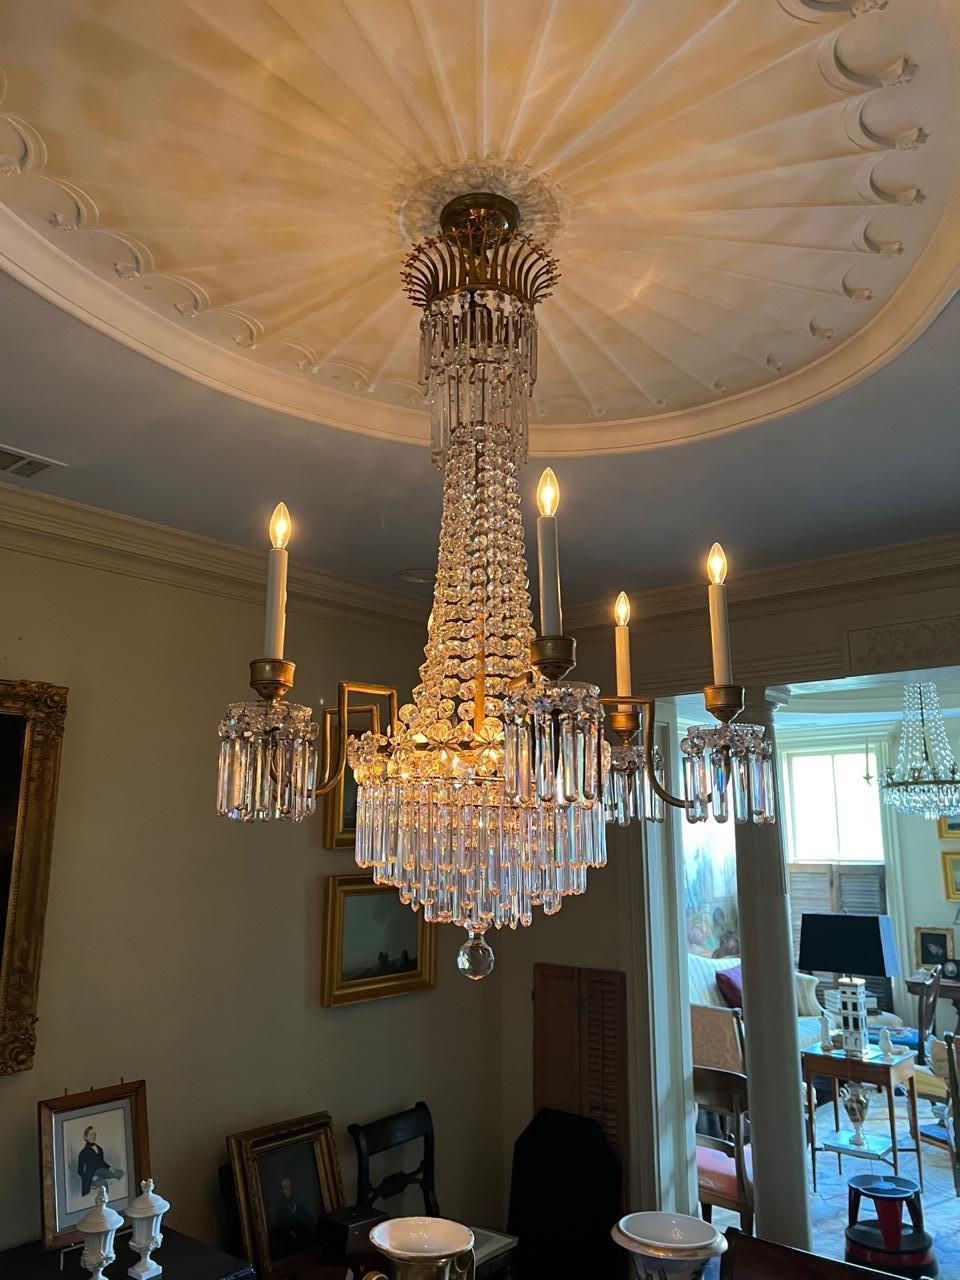 This outstanding fixture is the work of John Blades of Ludgate Hill, London. Blades was one of the premier chandelier makers in Regency England. A number of the chandeliers in Buckingham Palace were his work. The gilt bronze frame supports six arms